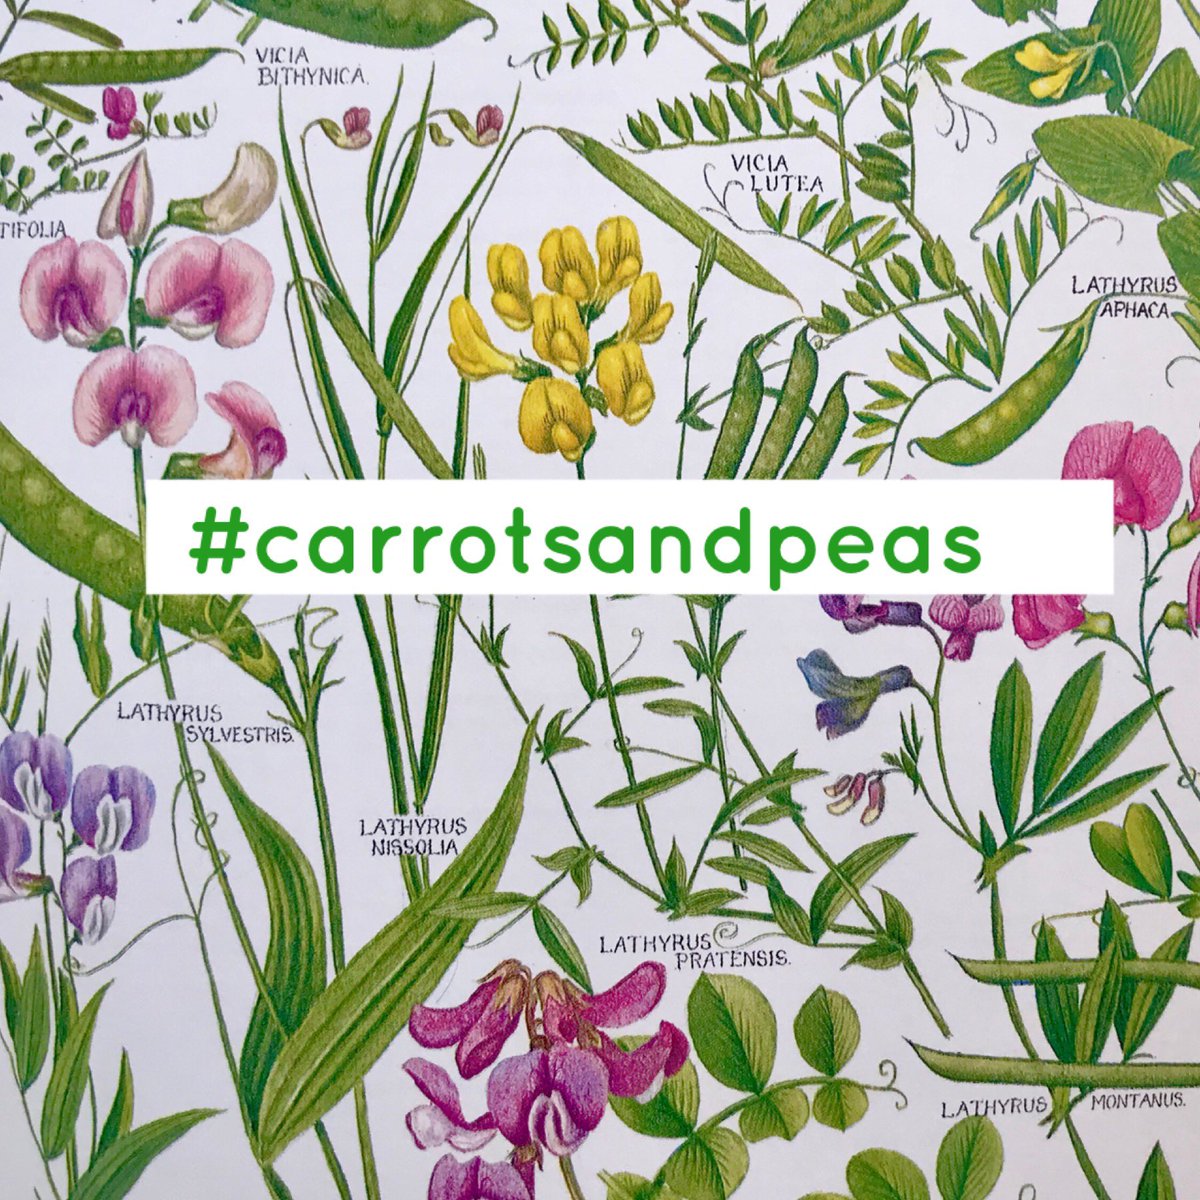 Find a member of the pea or carrot family, that’s the challenge this week from Wild Flower Hour! Don’t be tempted to eat them up though, as some members of the carrot family are extremely poisonous ☠️ Post your finds for #wildflowerhour this Sunday 8-9pm using #carrotsandpeas!